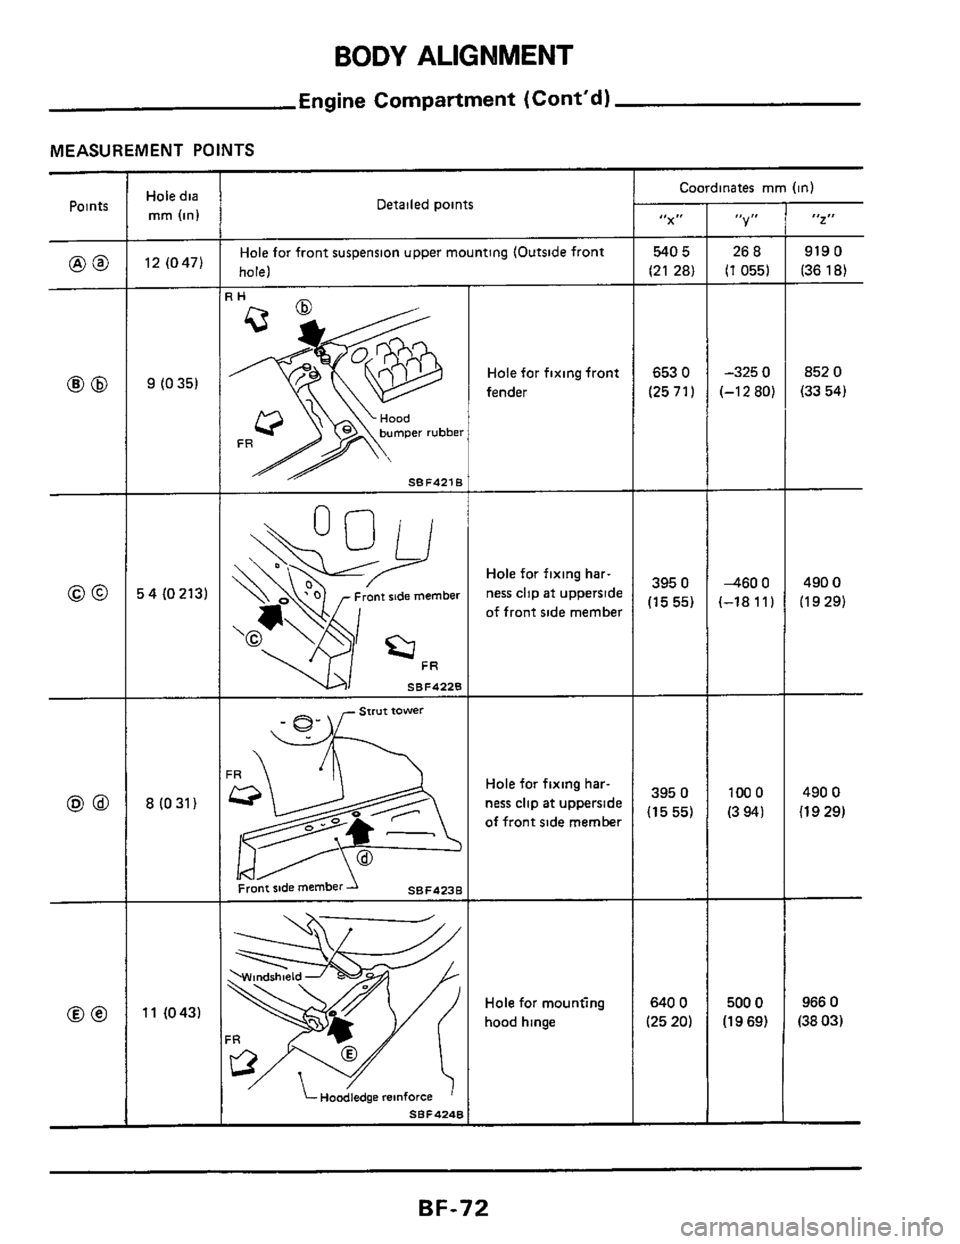 NISSAN 300ZX 1984 Z31 Body Workshop Manual BODY ALIGNMENT 
Engine Compartment  (Cont’d) 
MEASUREMENT POINTS 
Points Hole dia 
mm (in) Detailed  points Coordinates mm (in) 
“X” I, I, 2 
540 5 
(21 28) - 
653 0 
(2571) 
26 a 
(1 0551 - 
-3